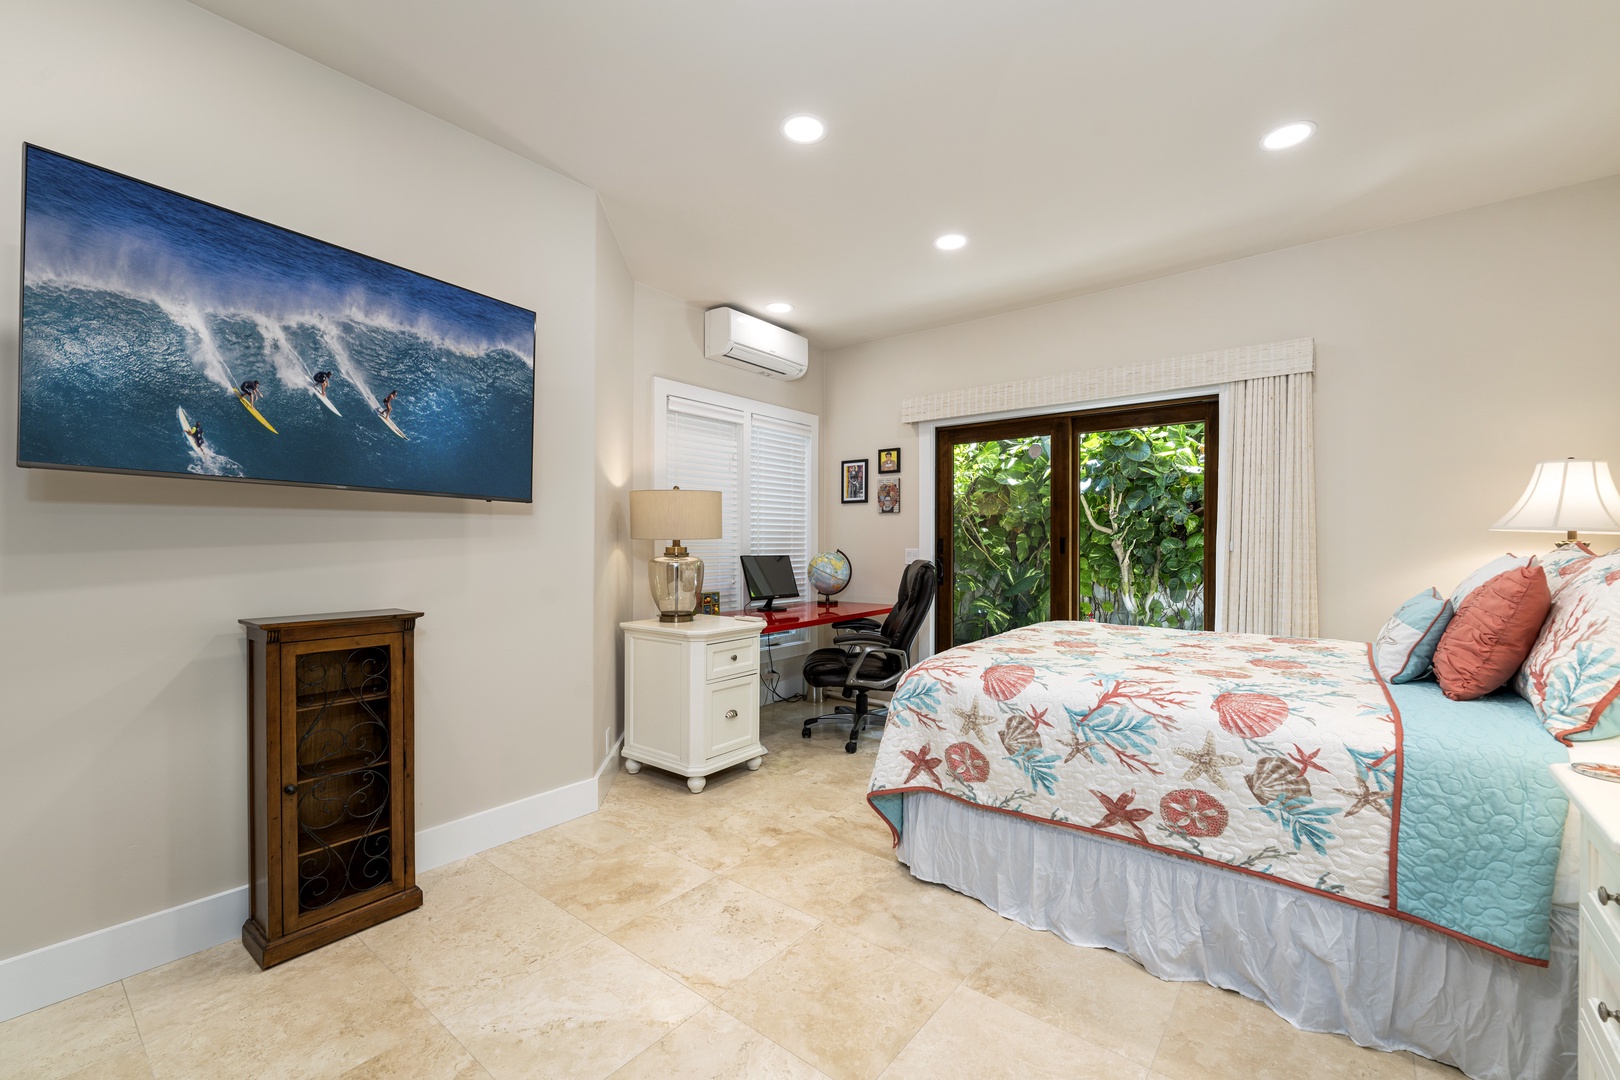 Kailua Kona Vacation Rentals, Ali'i Point #7 - Access to the yard from this bedroom